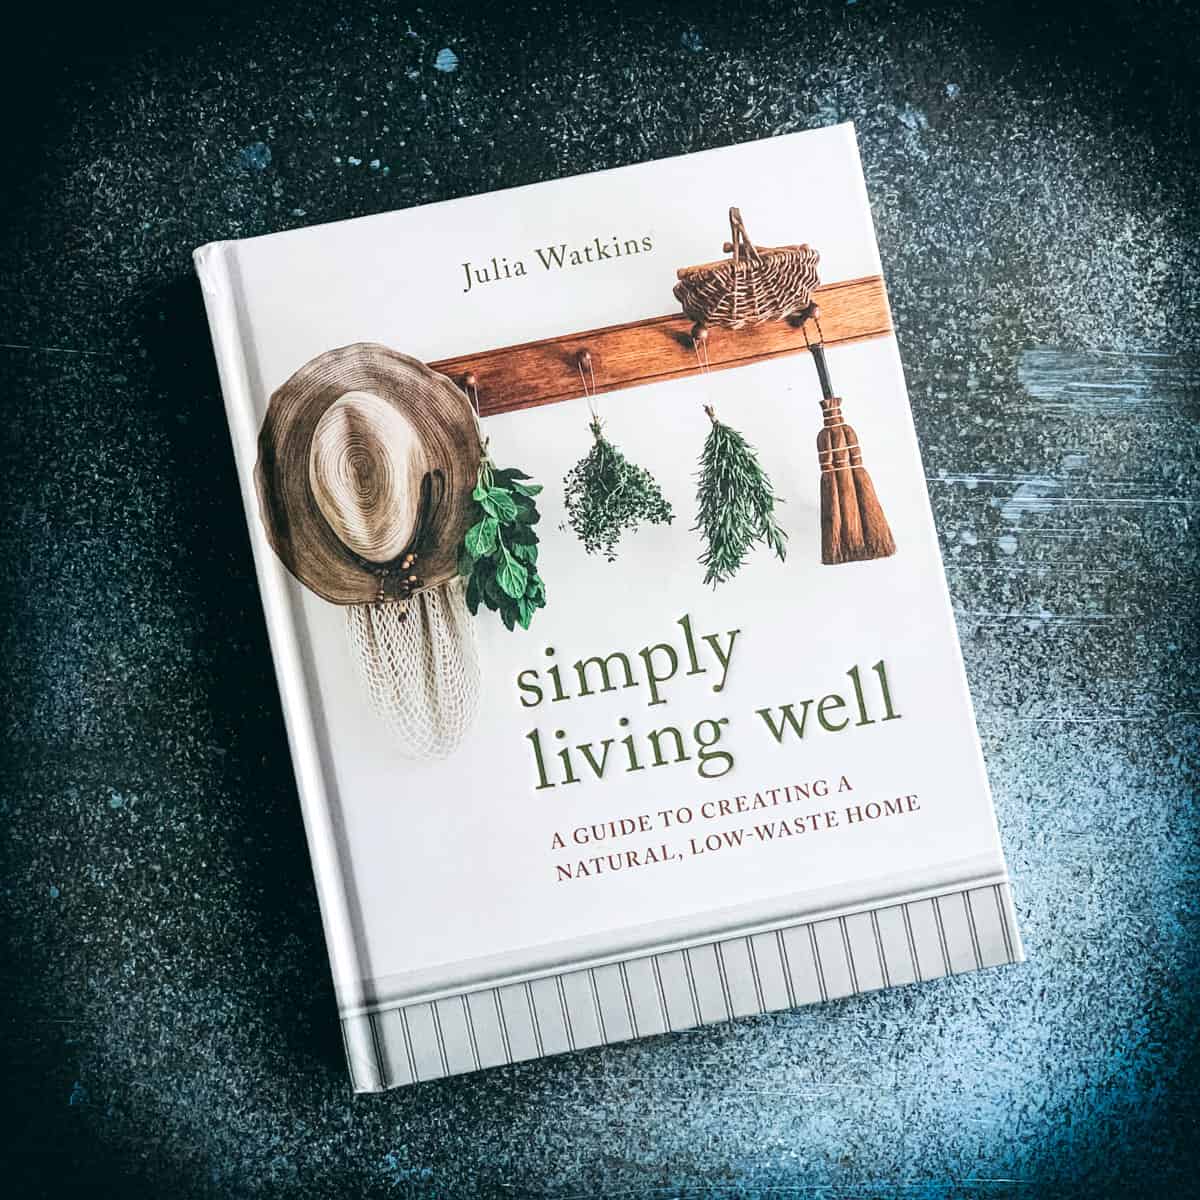 simply living well book by julia watkins on a dark blue background